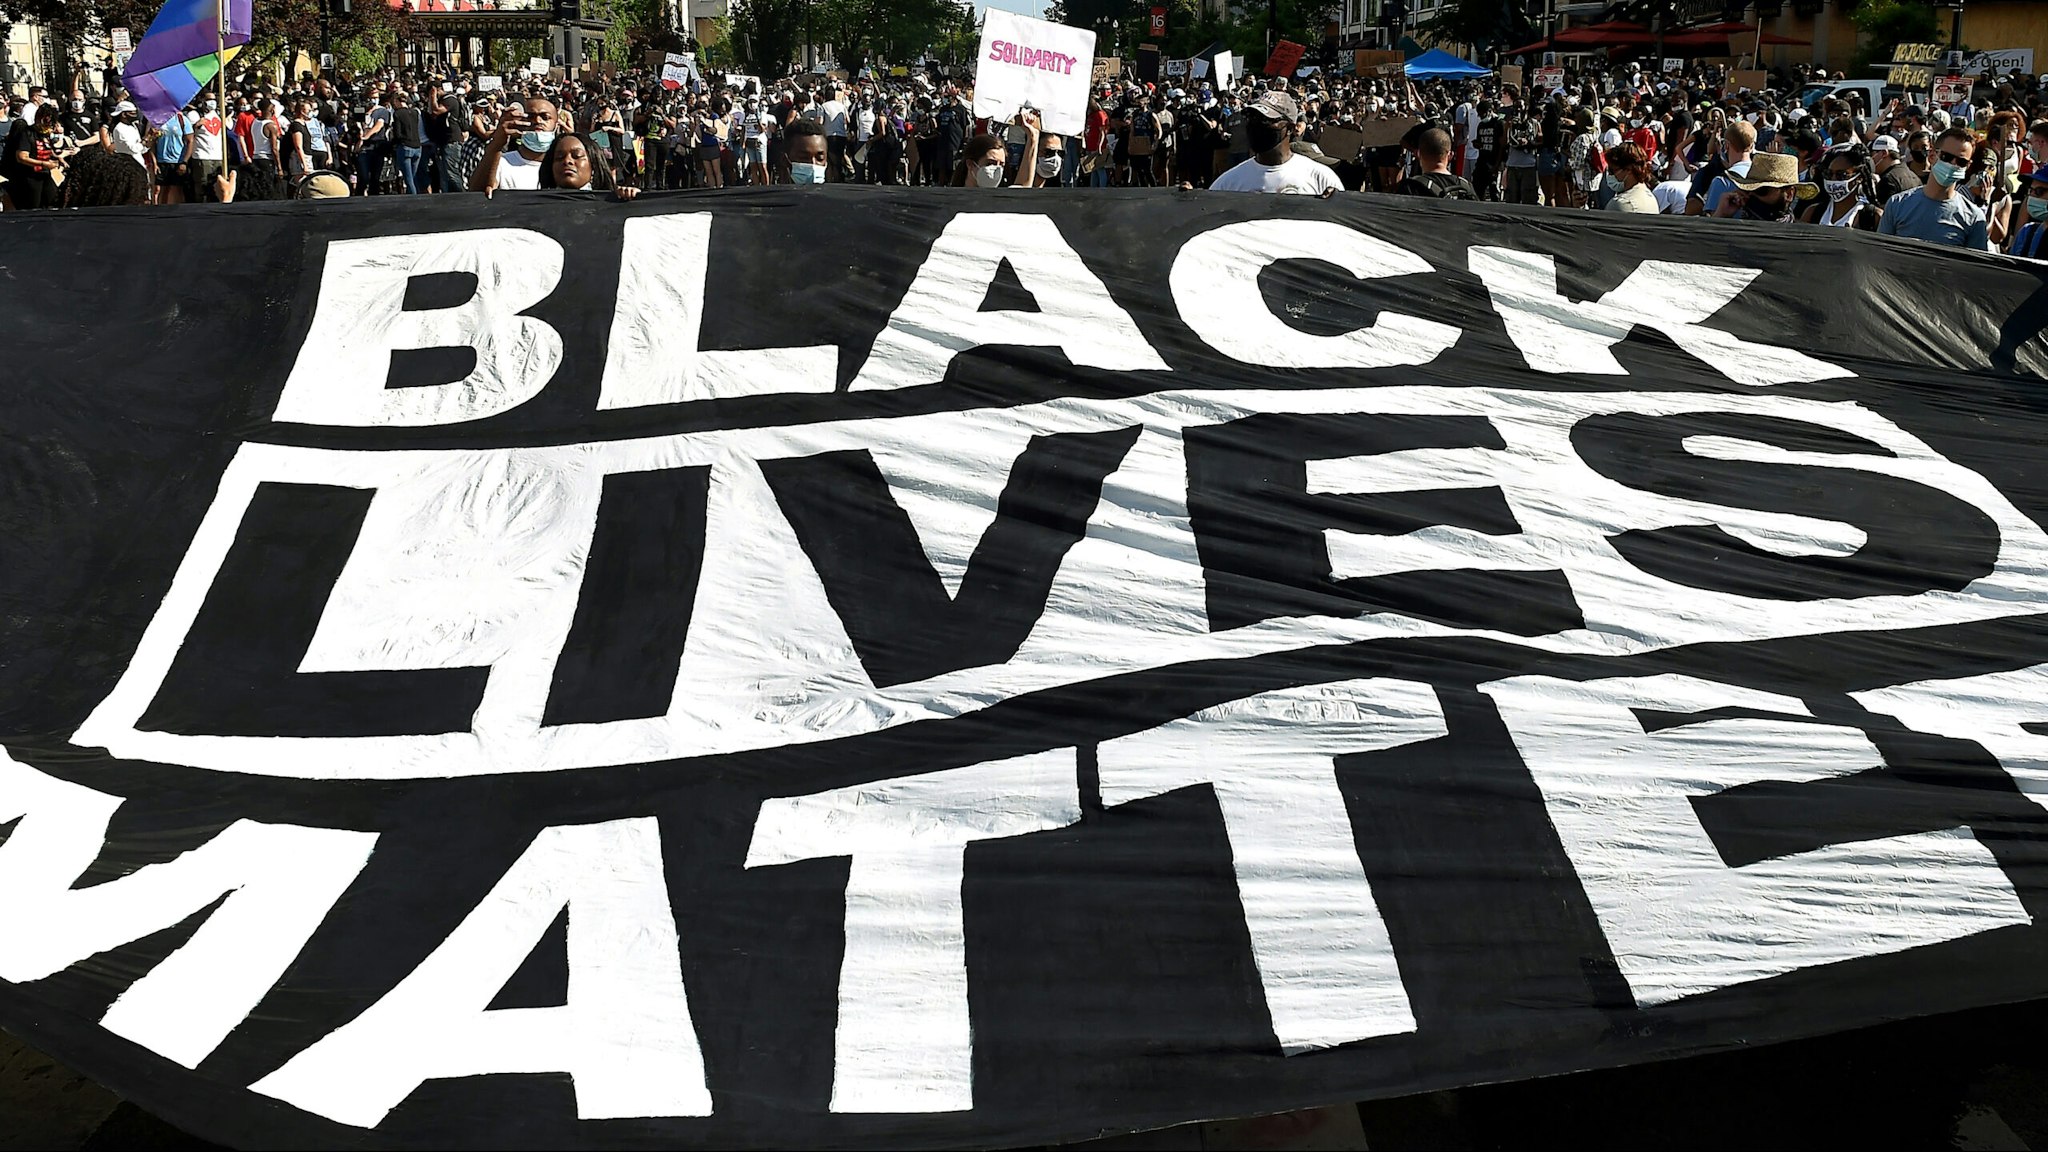 TOPSHOT - Demonstrators deploy a " Black Lives Matter" banner near the White House during a demonstration against racism and police brutality, in Washington, DC on June 6, 2020. - Demonstrations are being held across the US following the death of George Floyd on May 25, 2020, while being arrested in Minneapolis, Minnesota.